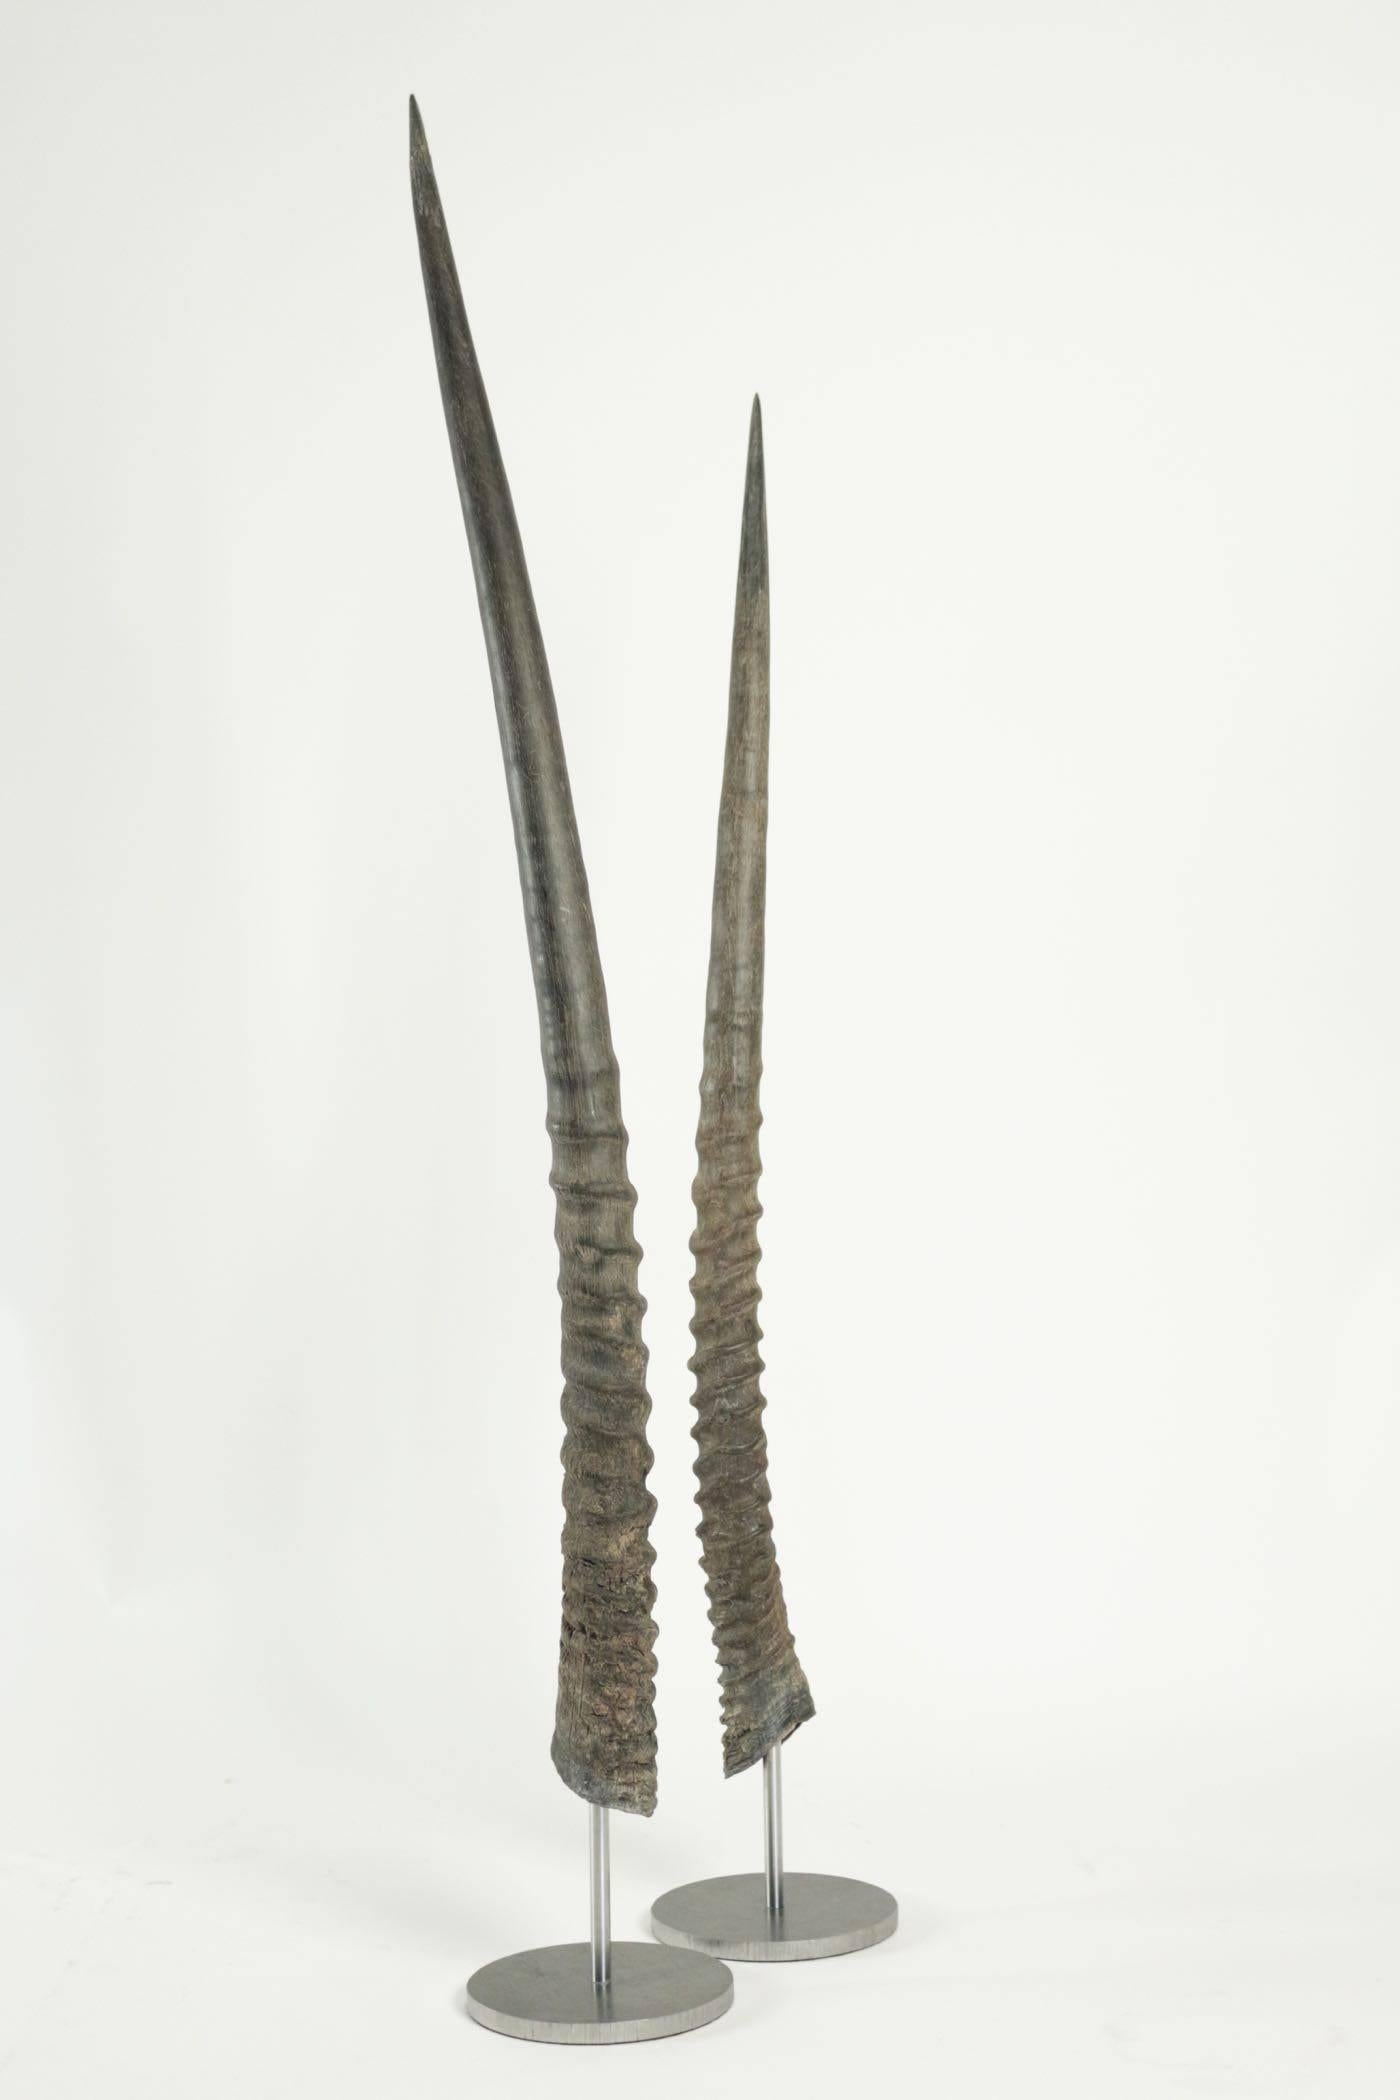 Early 20th Century Pair of African Antelope Horns Mounted on Base of Stainless Steel For Sale